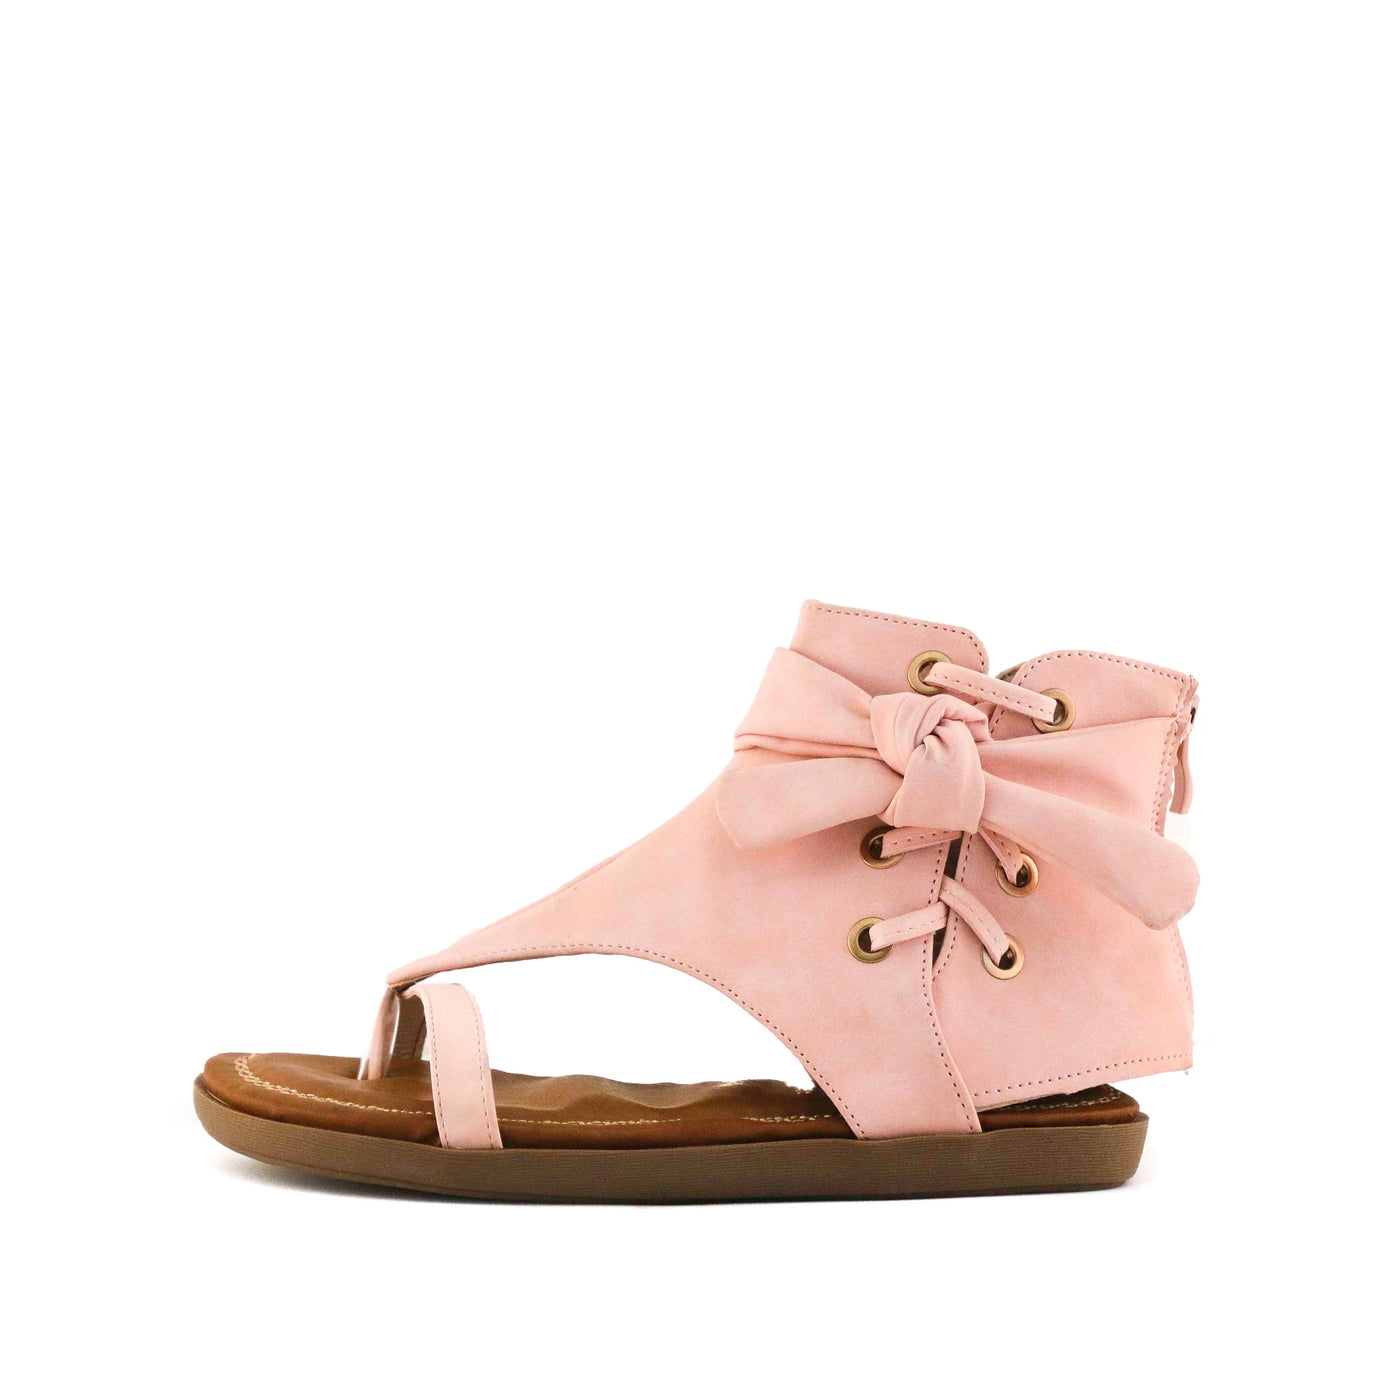 Women's Chi Lace Detail Gladiator Sandal Peach by Nest Shoes